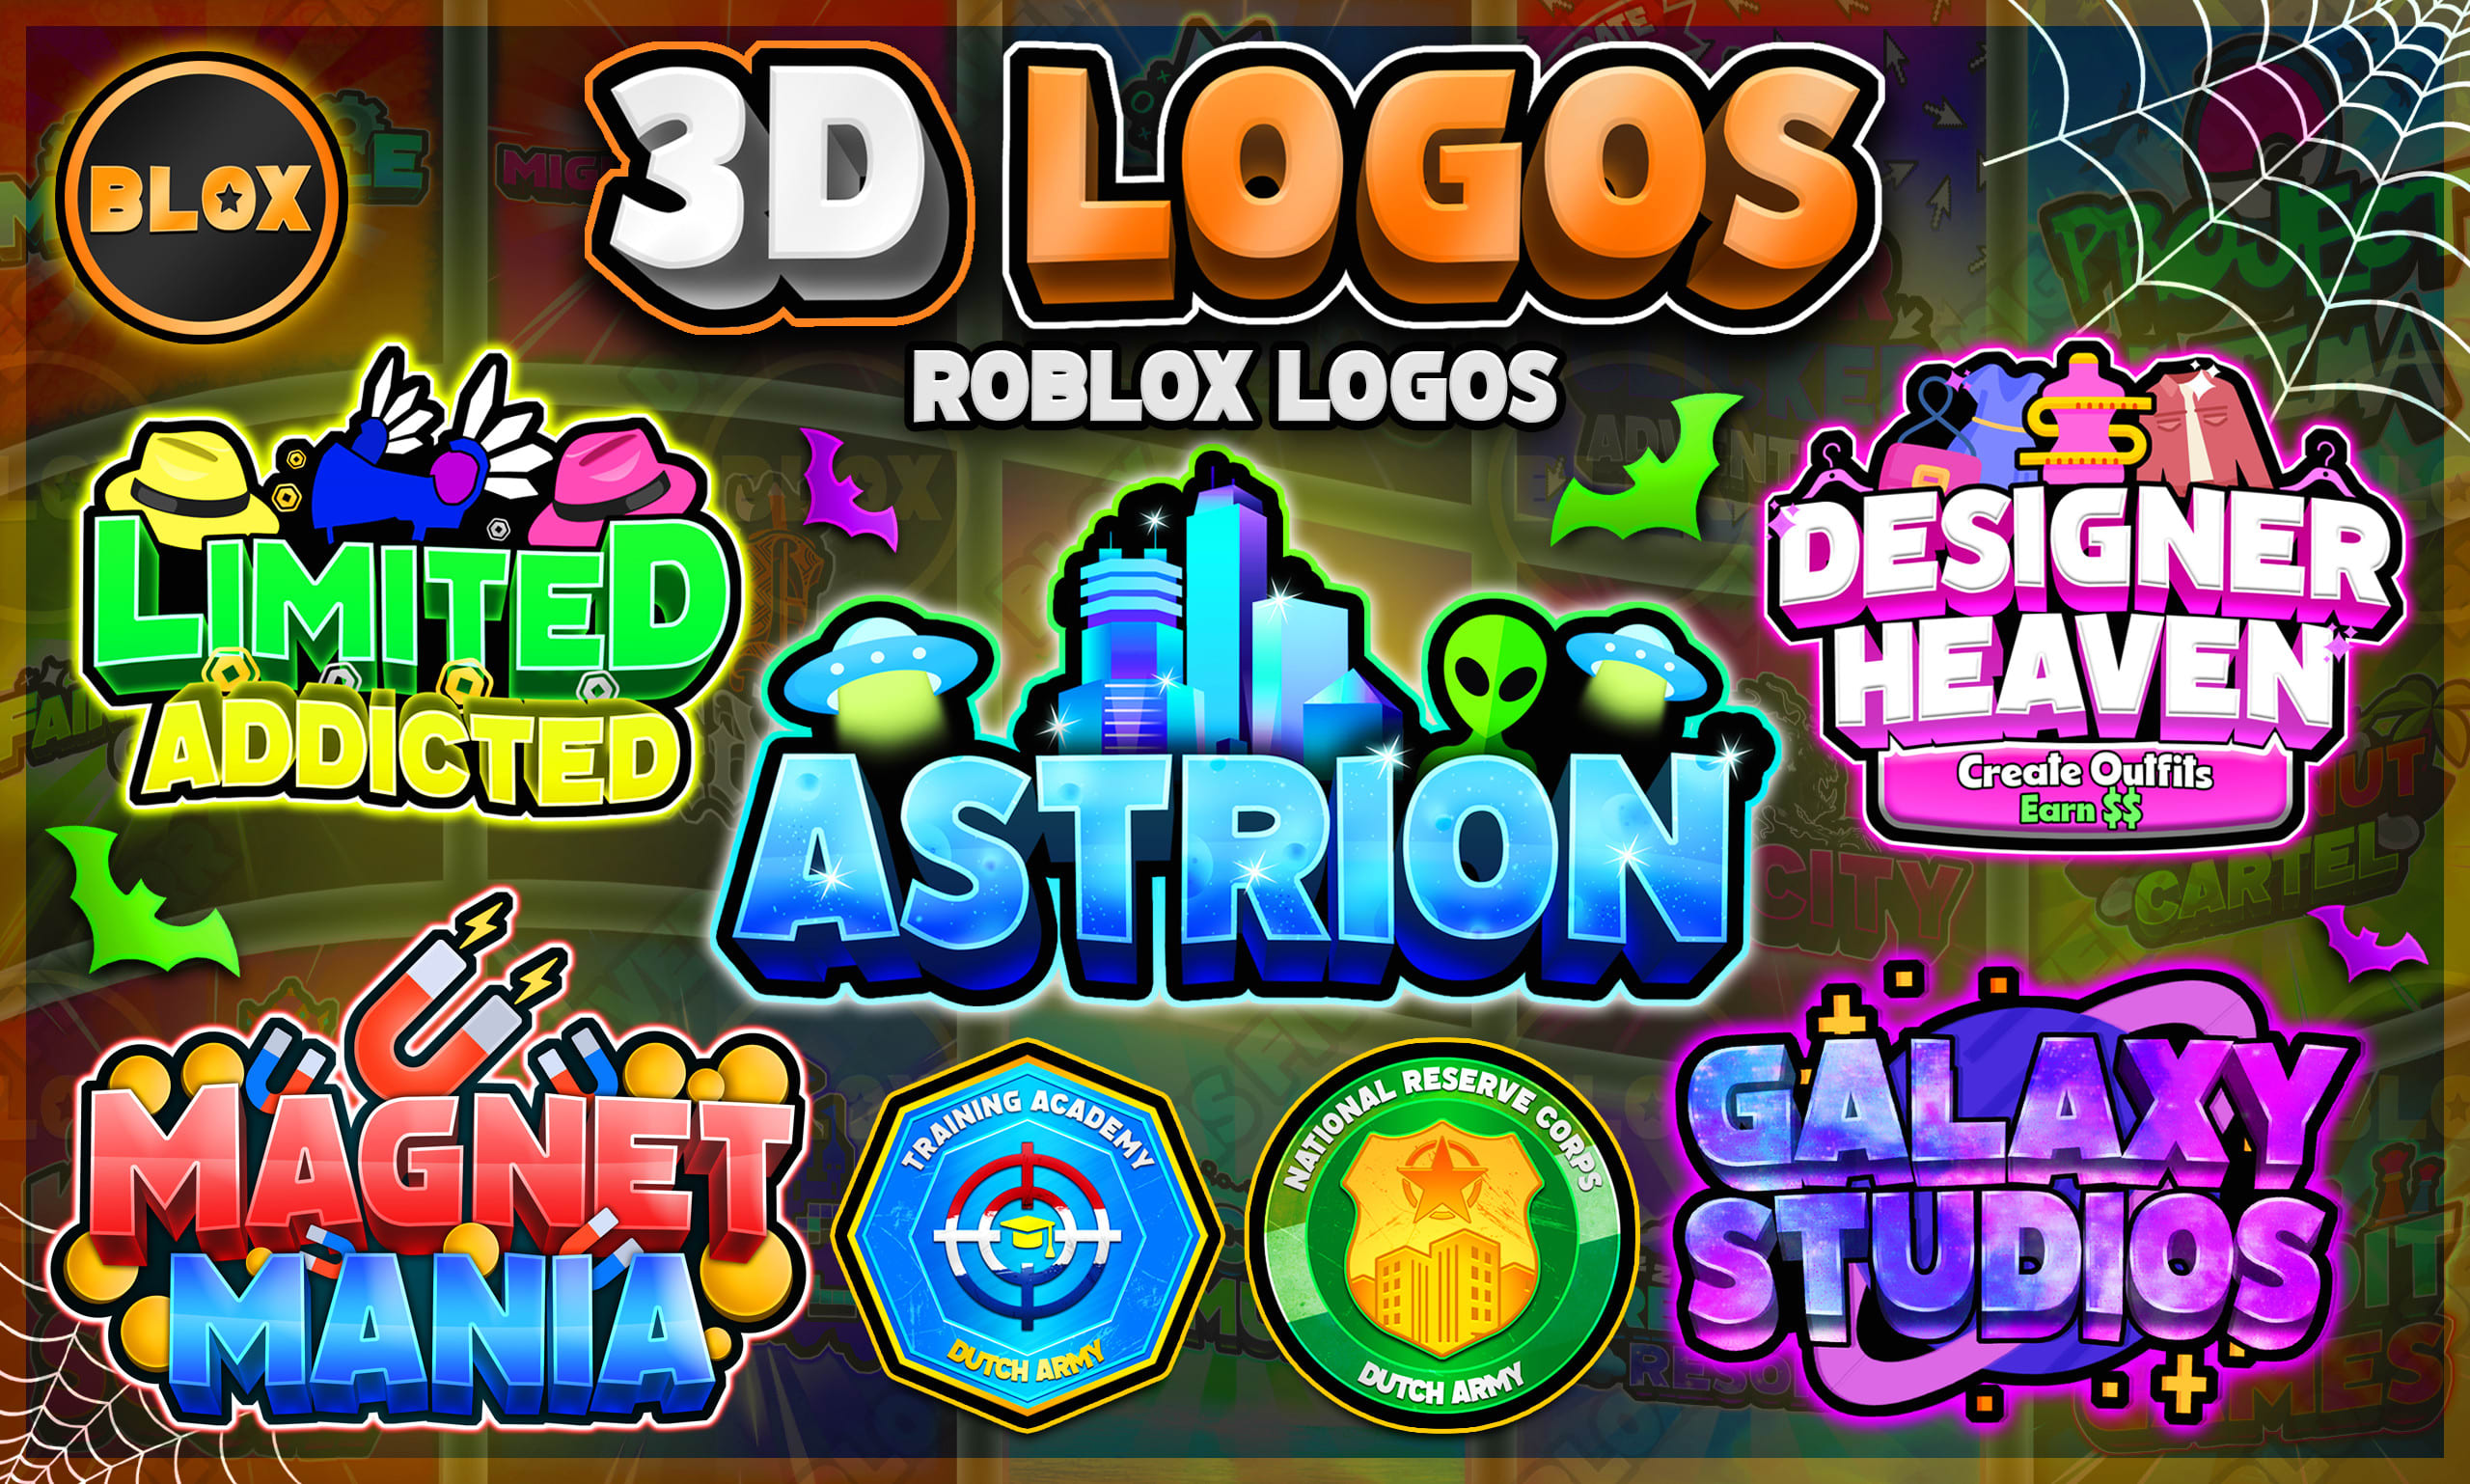 Create roblox gamepass and badge icons for your roblox game by Blox_designs